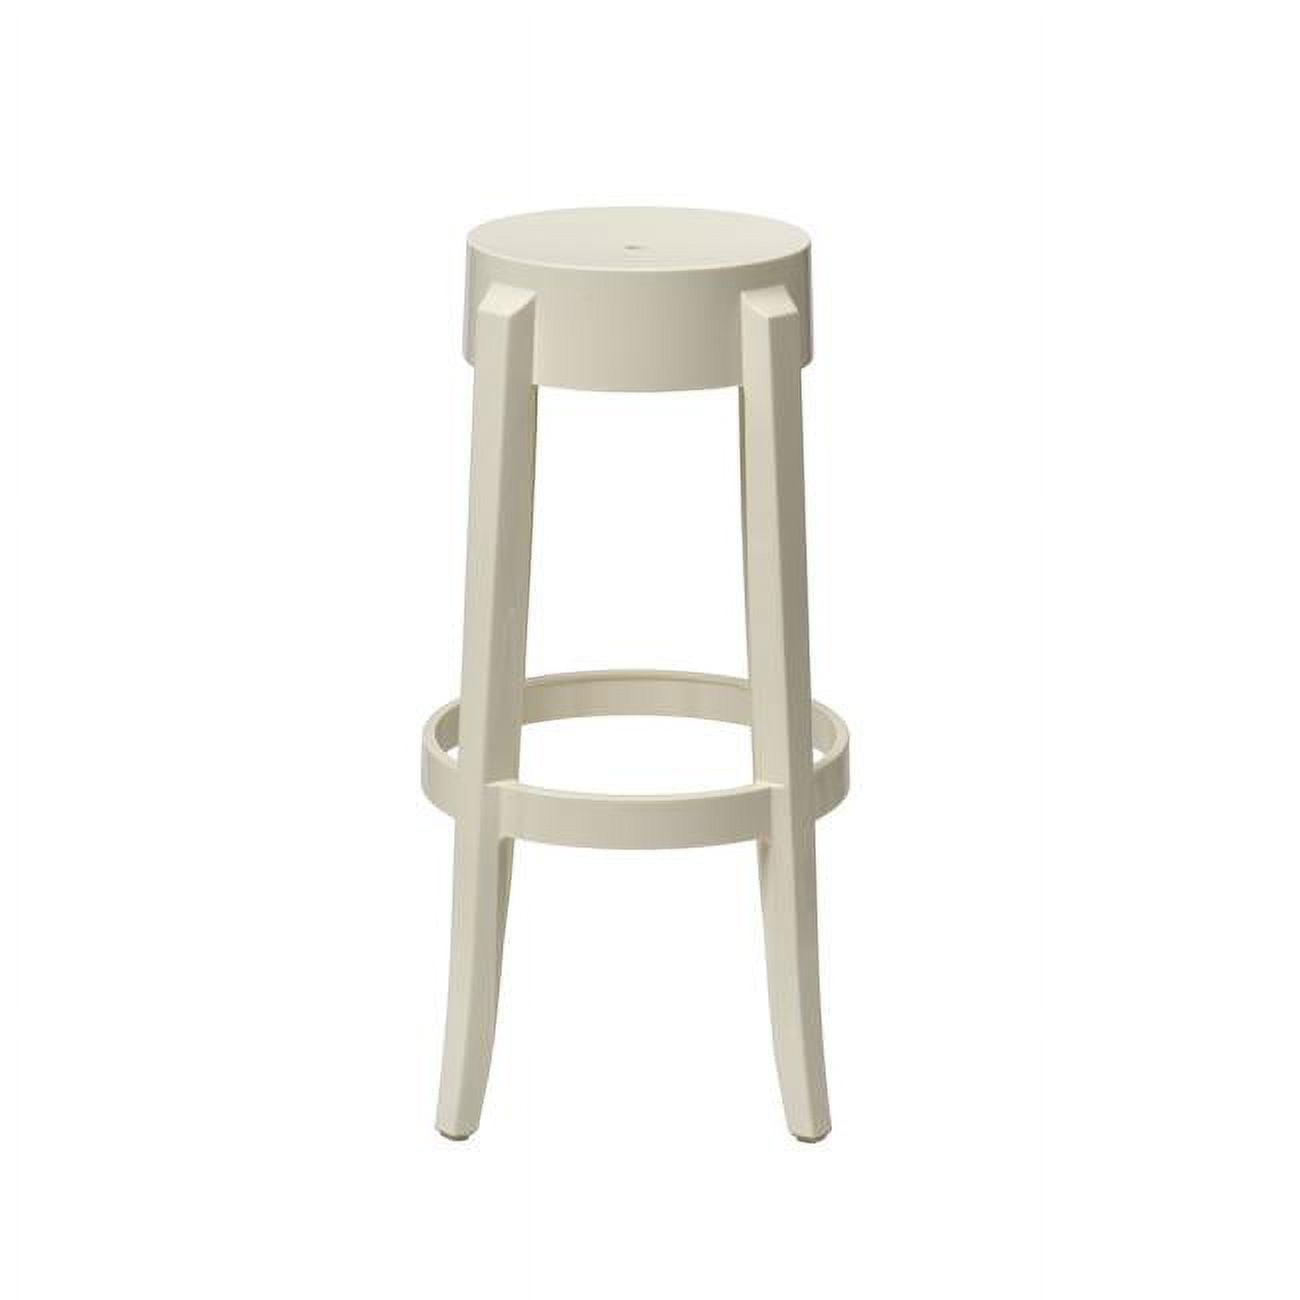 Picture of Commercial Seating Products RPC-Kage-Stool-SW Polycarbonate Bar Height Backless Kage Stool, Creamy White - 30 in.